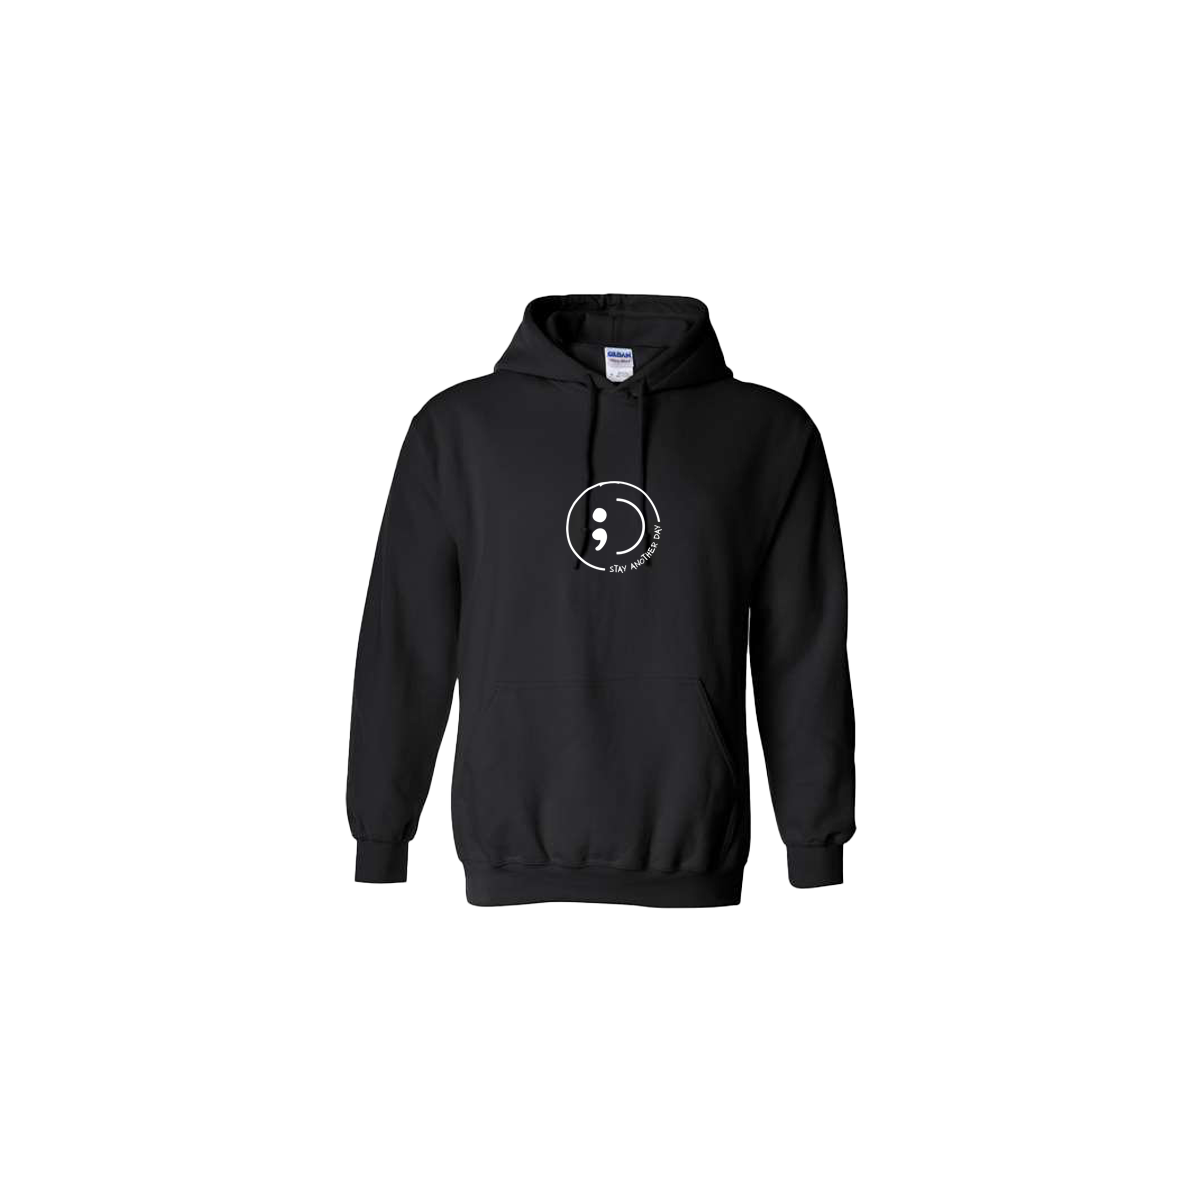 Stay Another Day Smiley with text Embroidered Black Hoodie - Mental Health Awareness Clothing